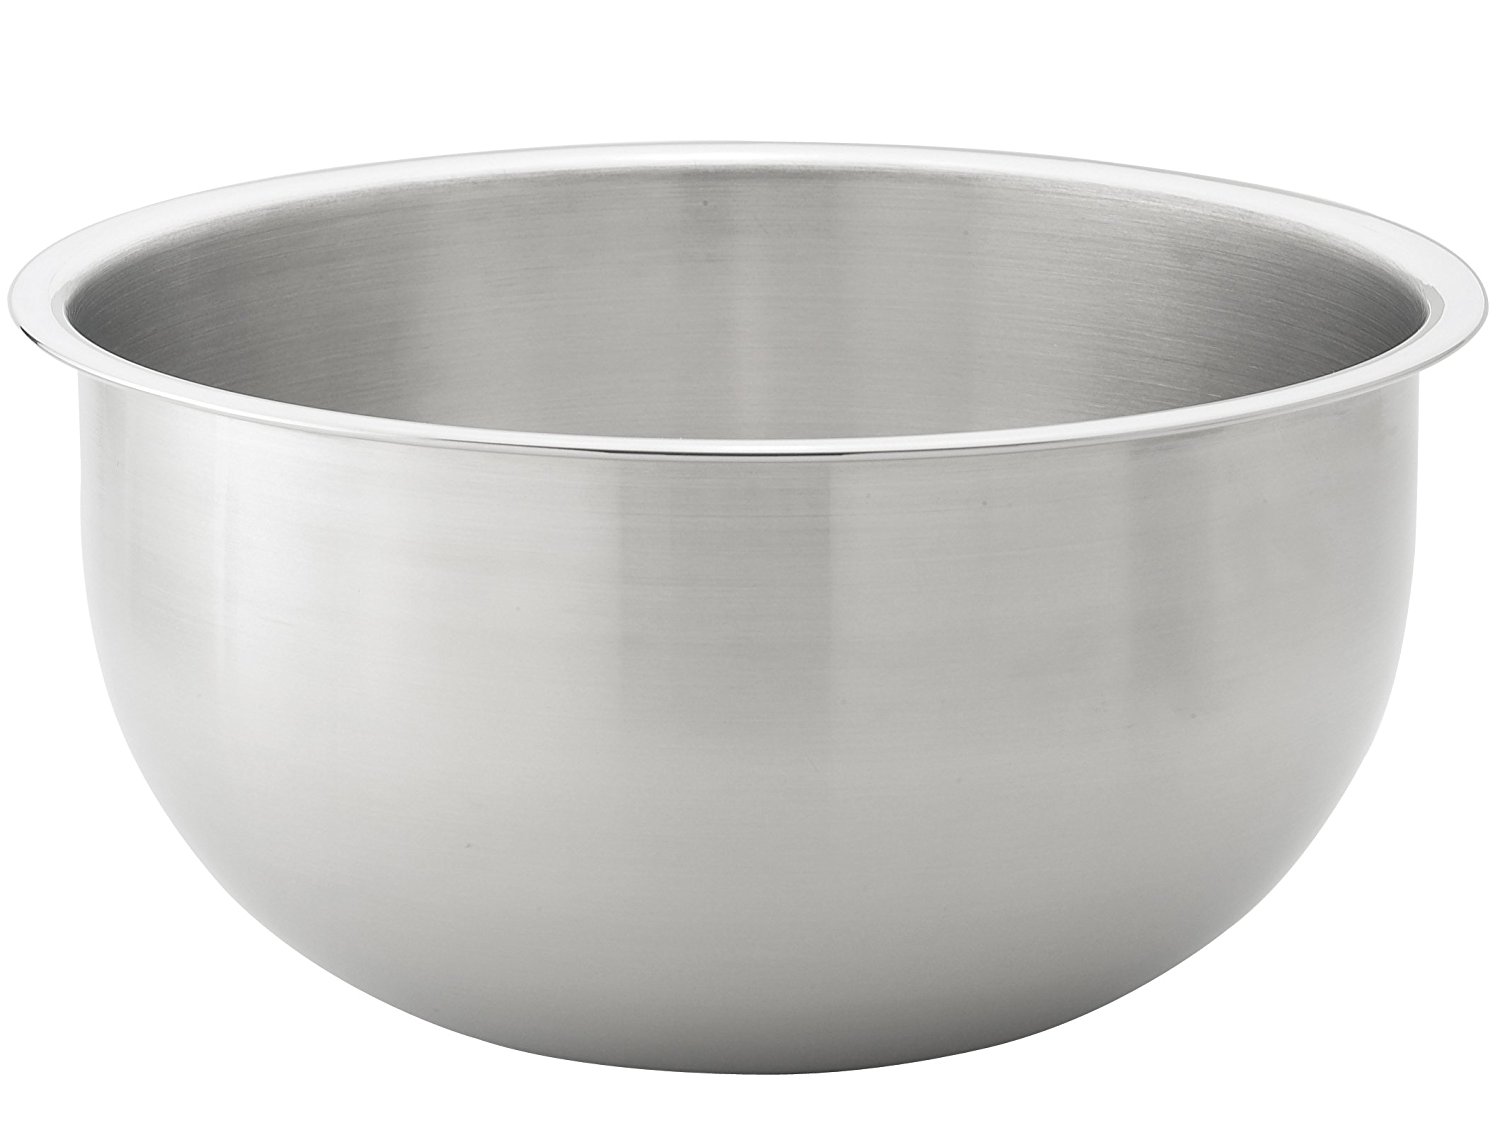 stainless steel mixing bowls made in america